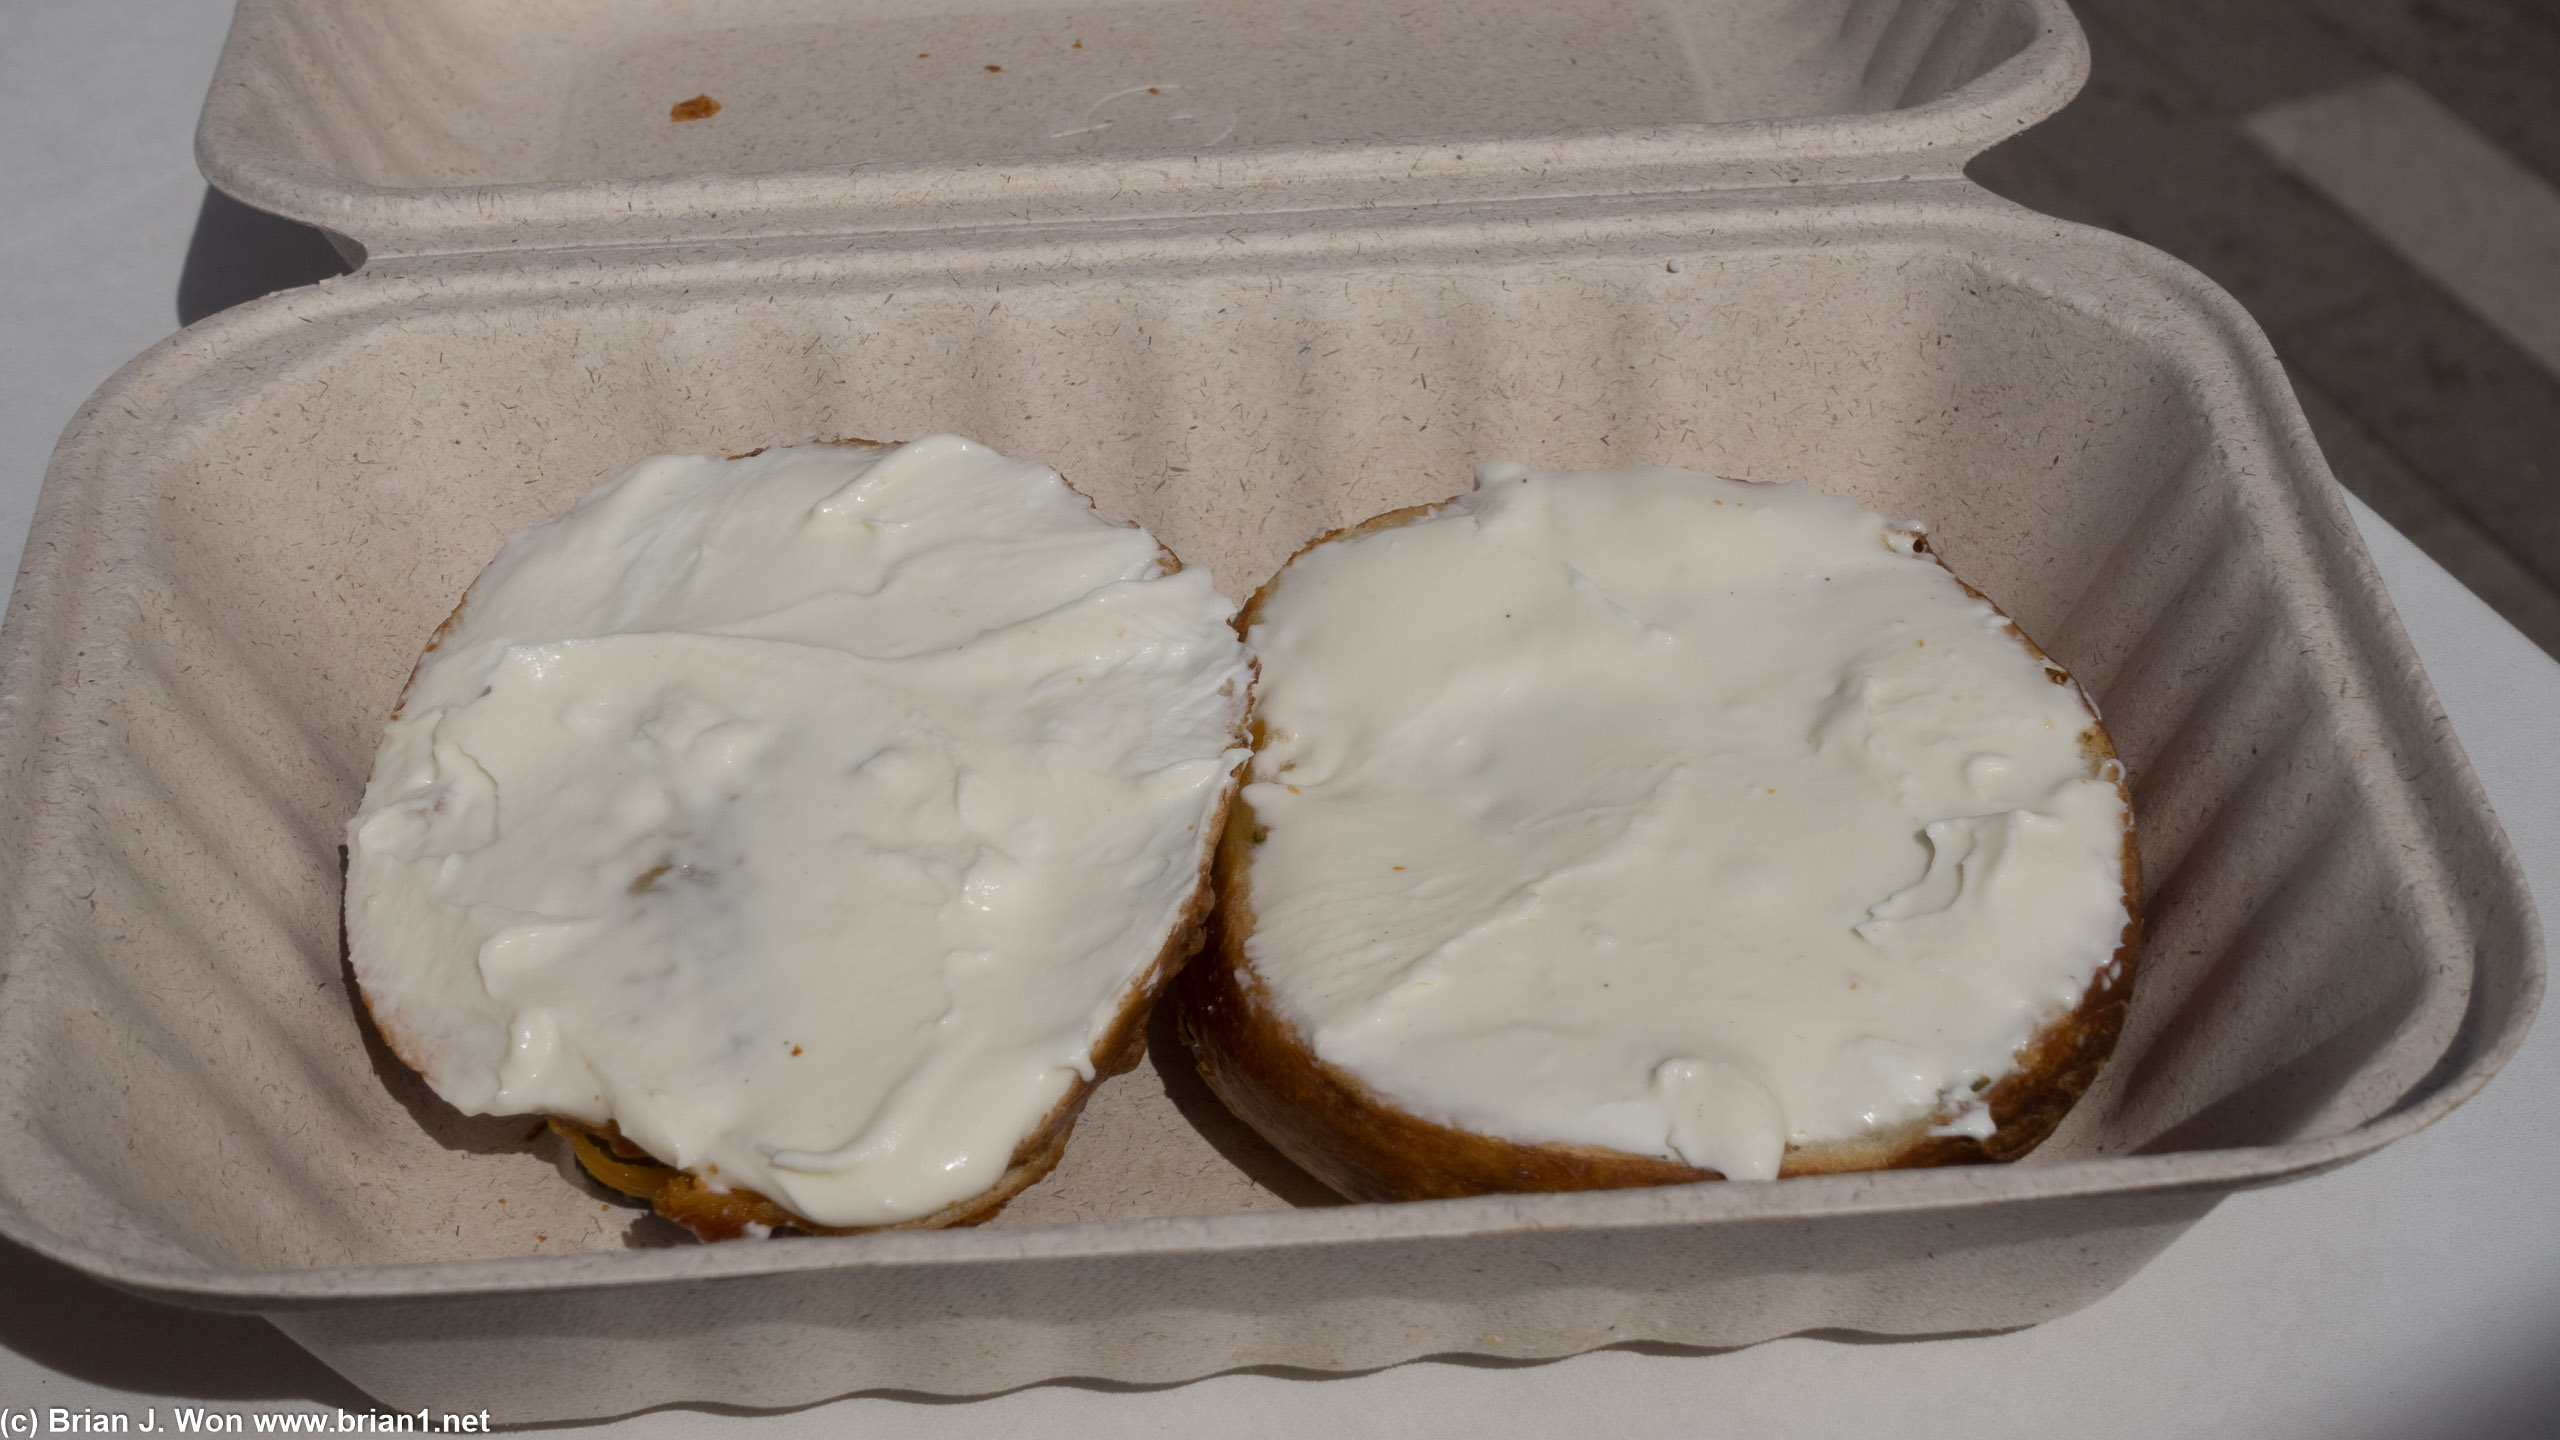 Jalapeno bagel with cream cheese-- saved this for later.